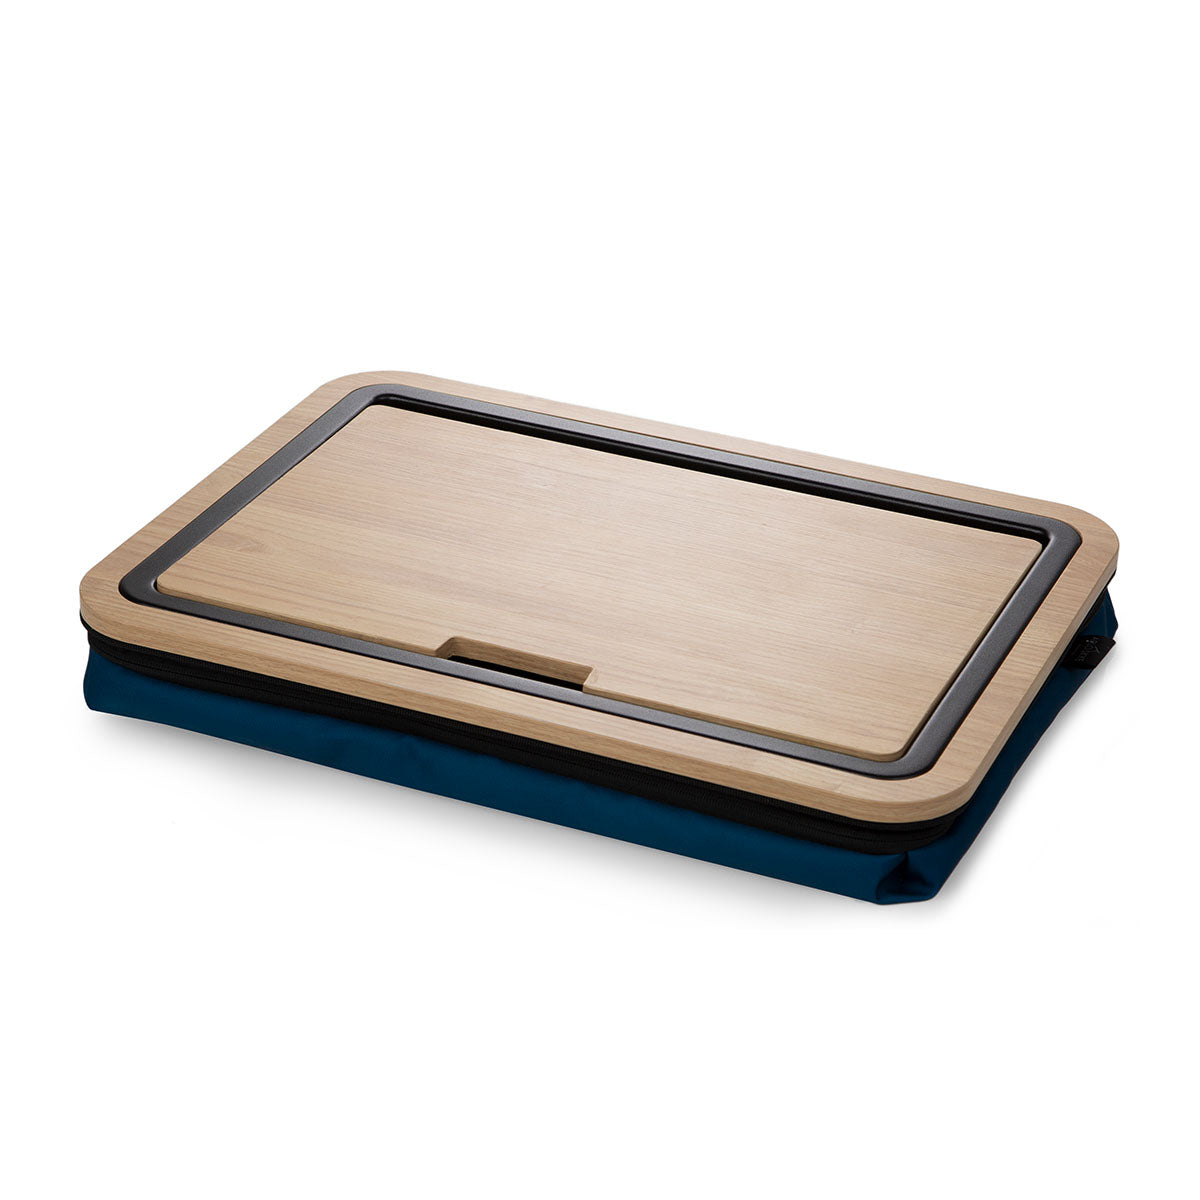 Front view of Lap Desk with cushion in navy color with no objects on surface.